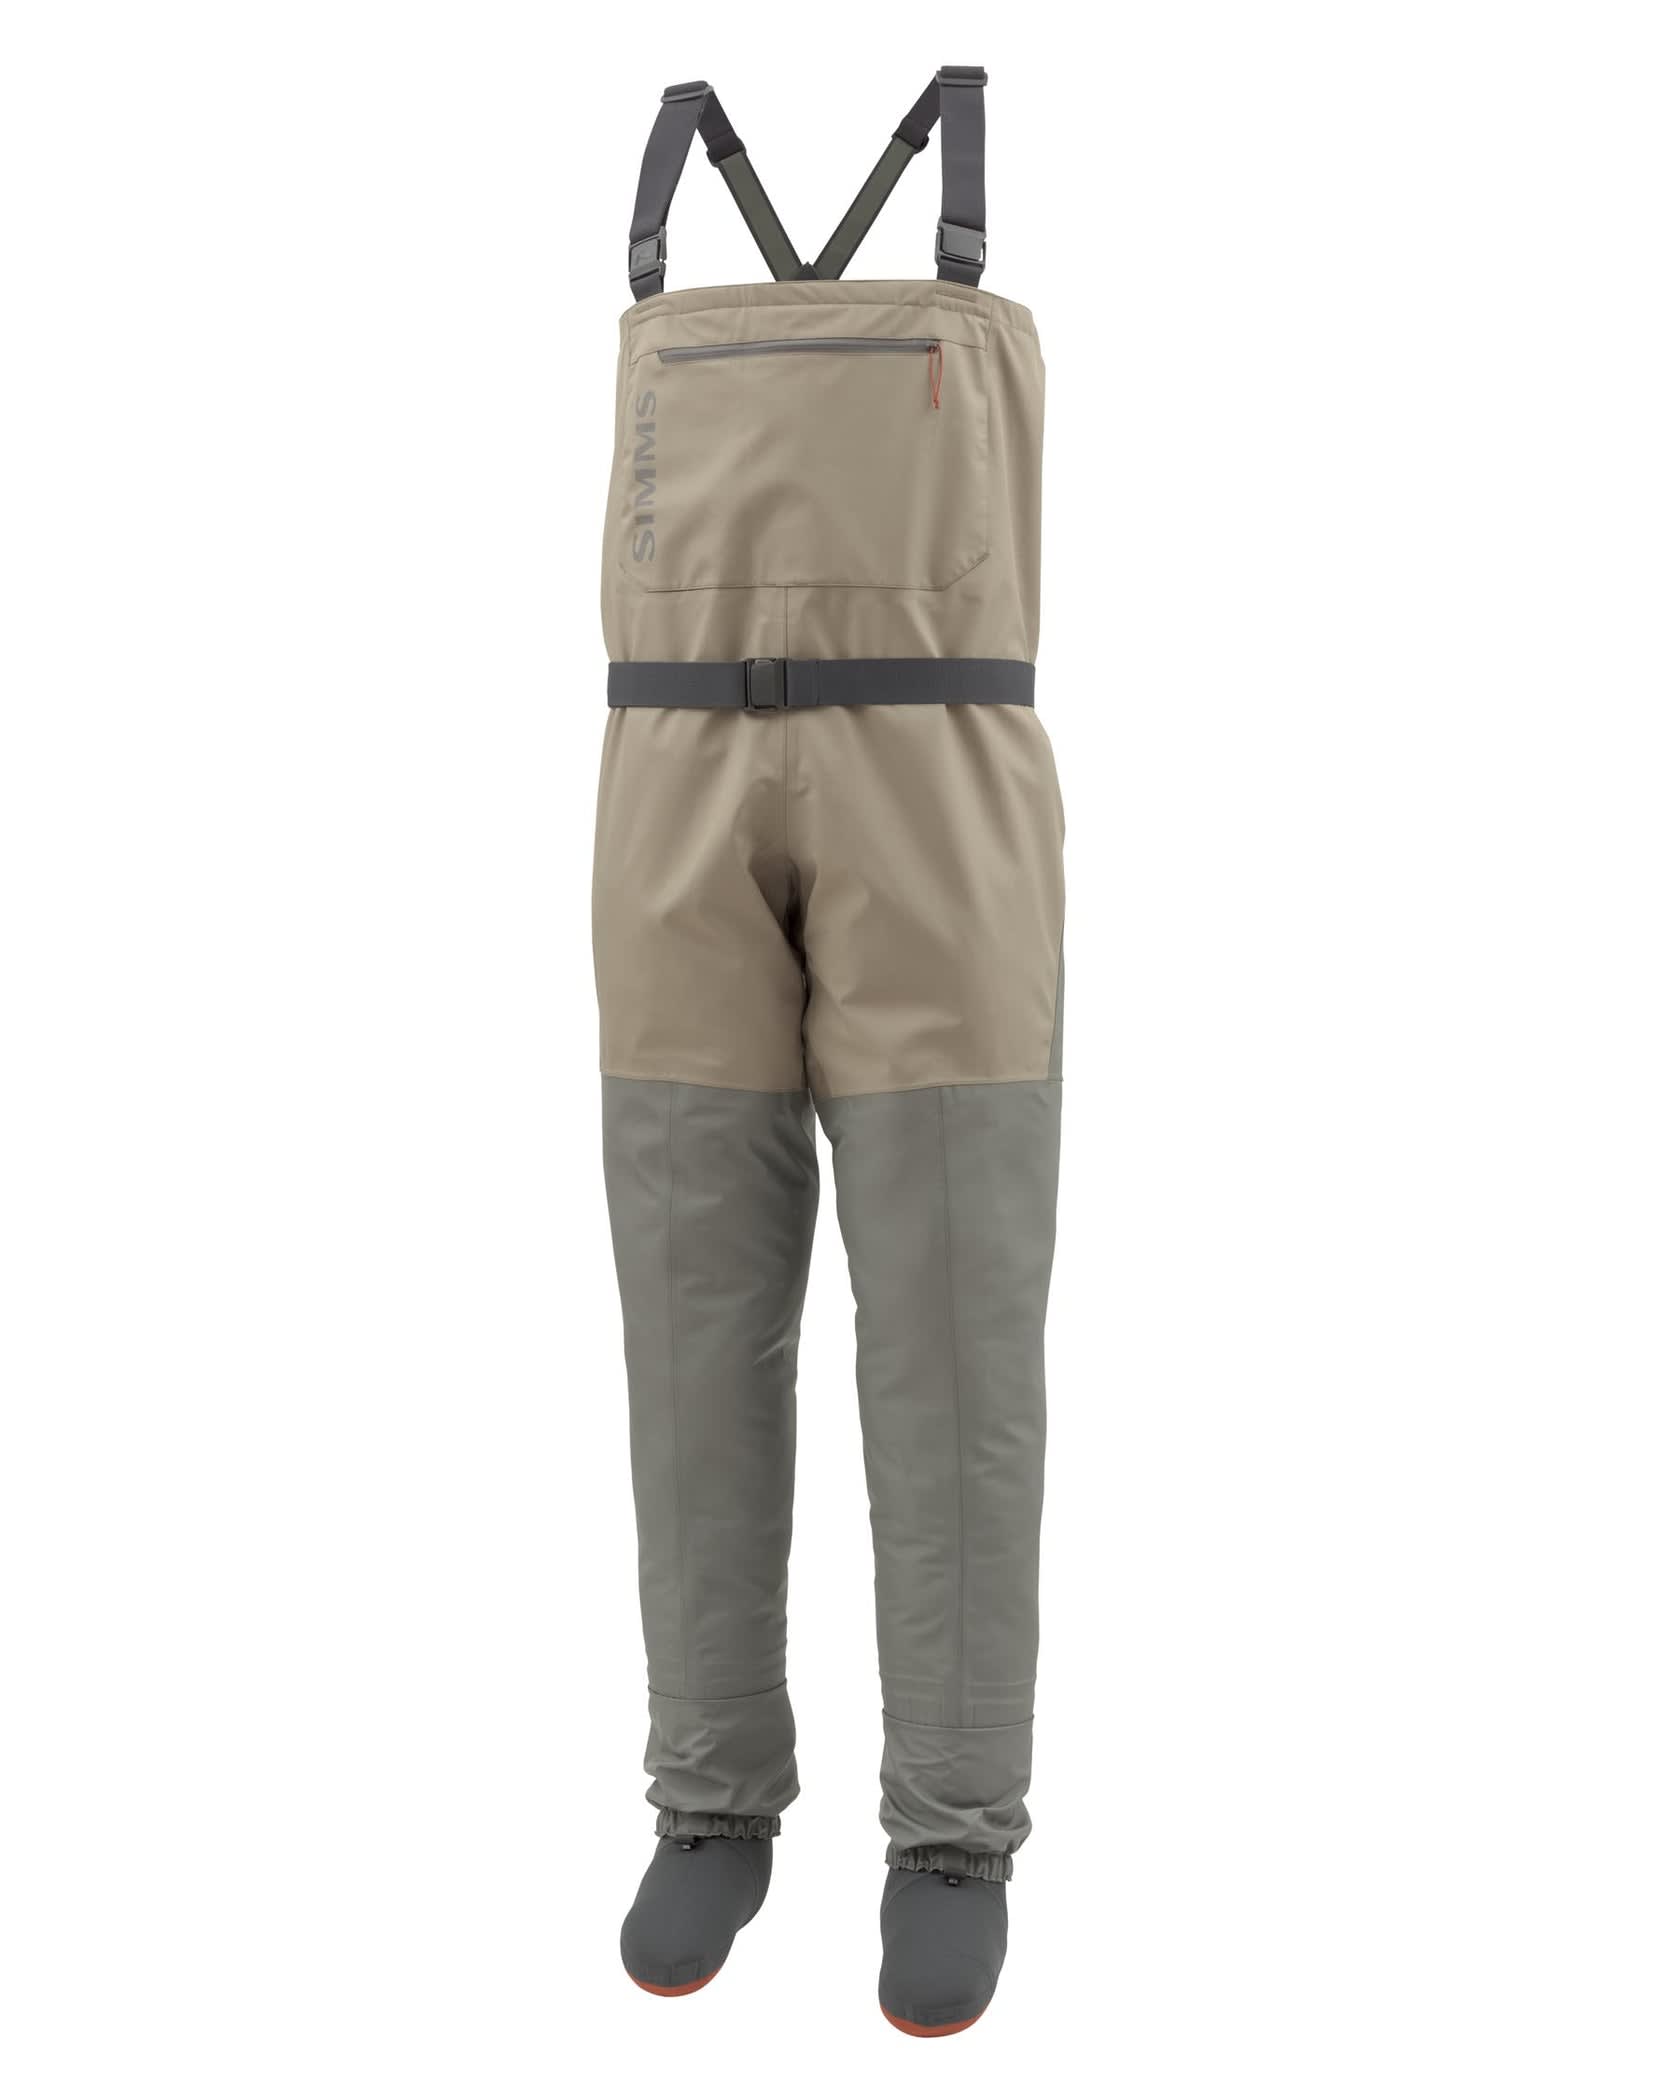 Fishing Waist Waders for Men for sale